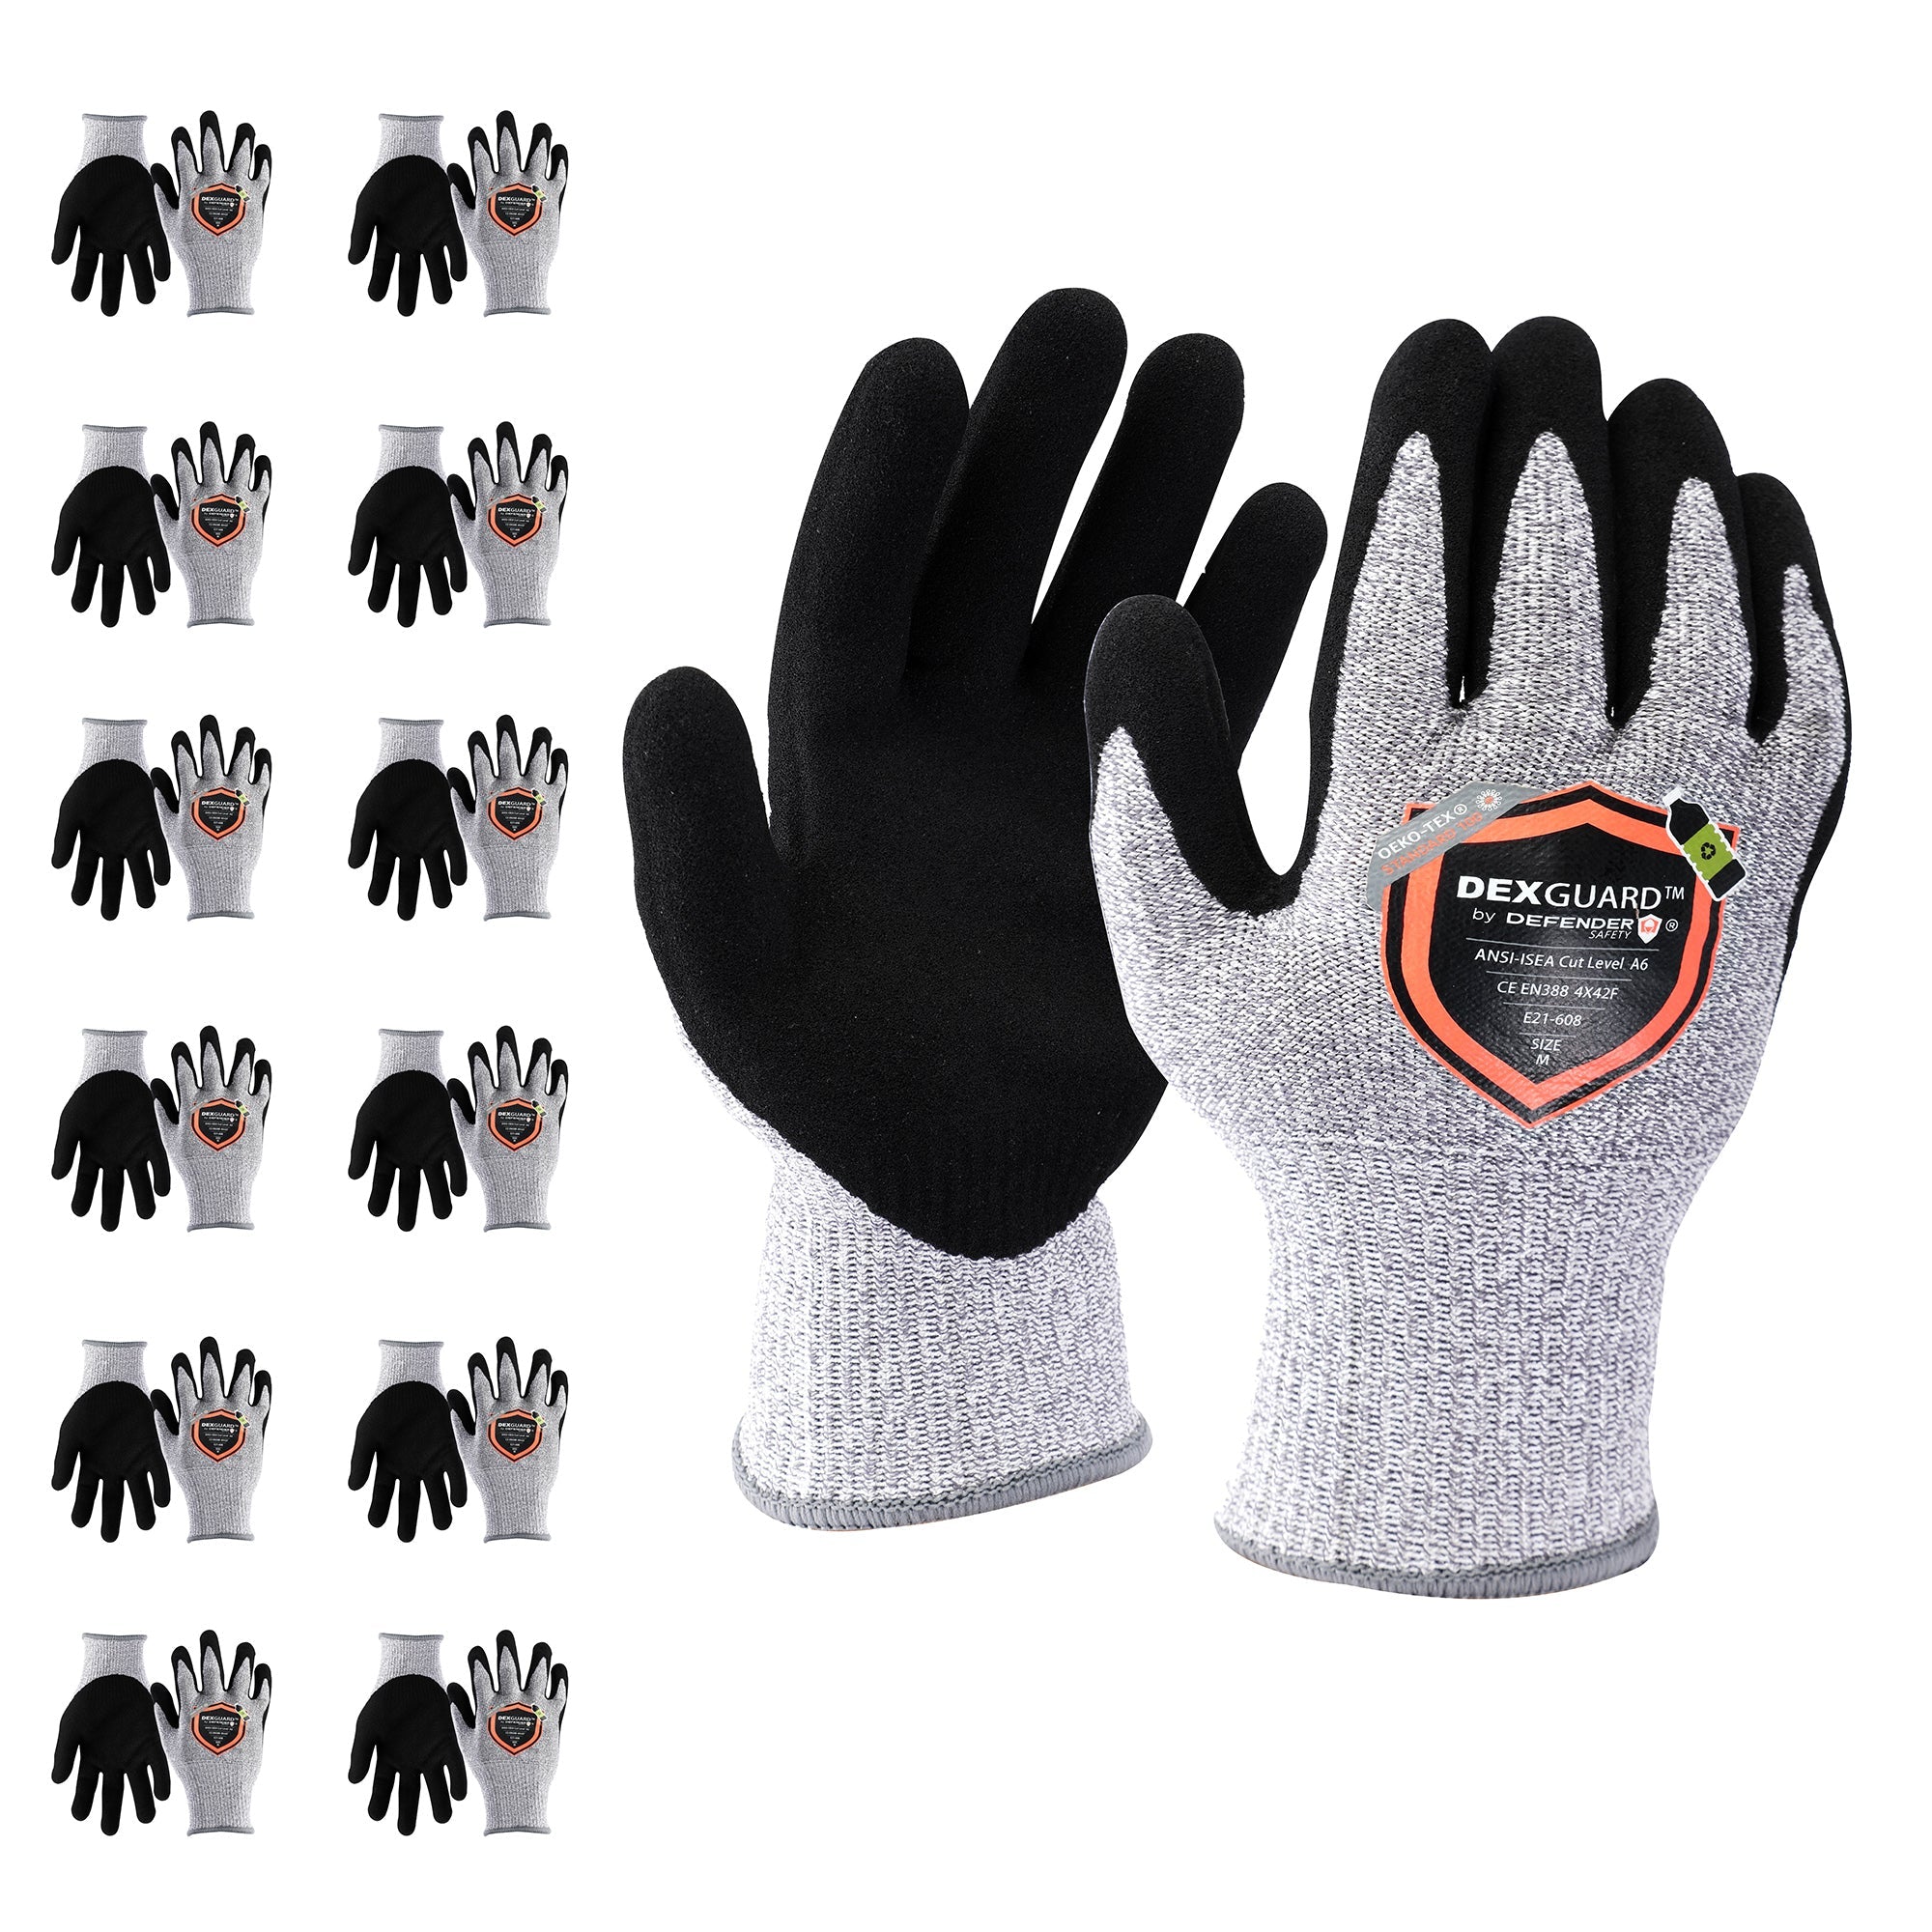 A6 Cut Resistant Gloves, 12 Pair Pack, Level 4 Abrasion Resistant, Textured Nitrile Coating, Touch Screen Compatible DEXGUARD, Small